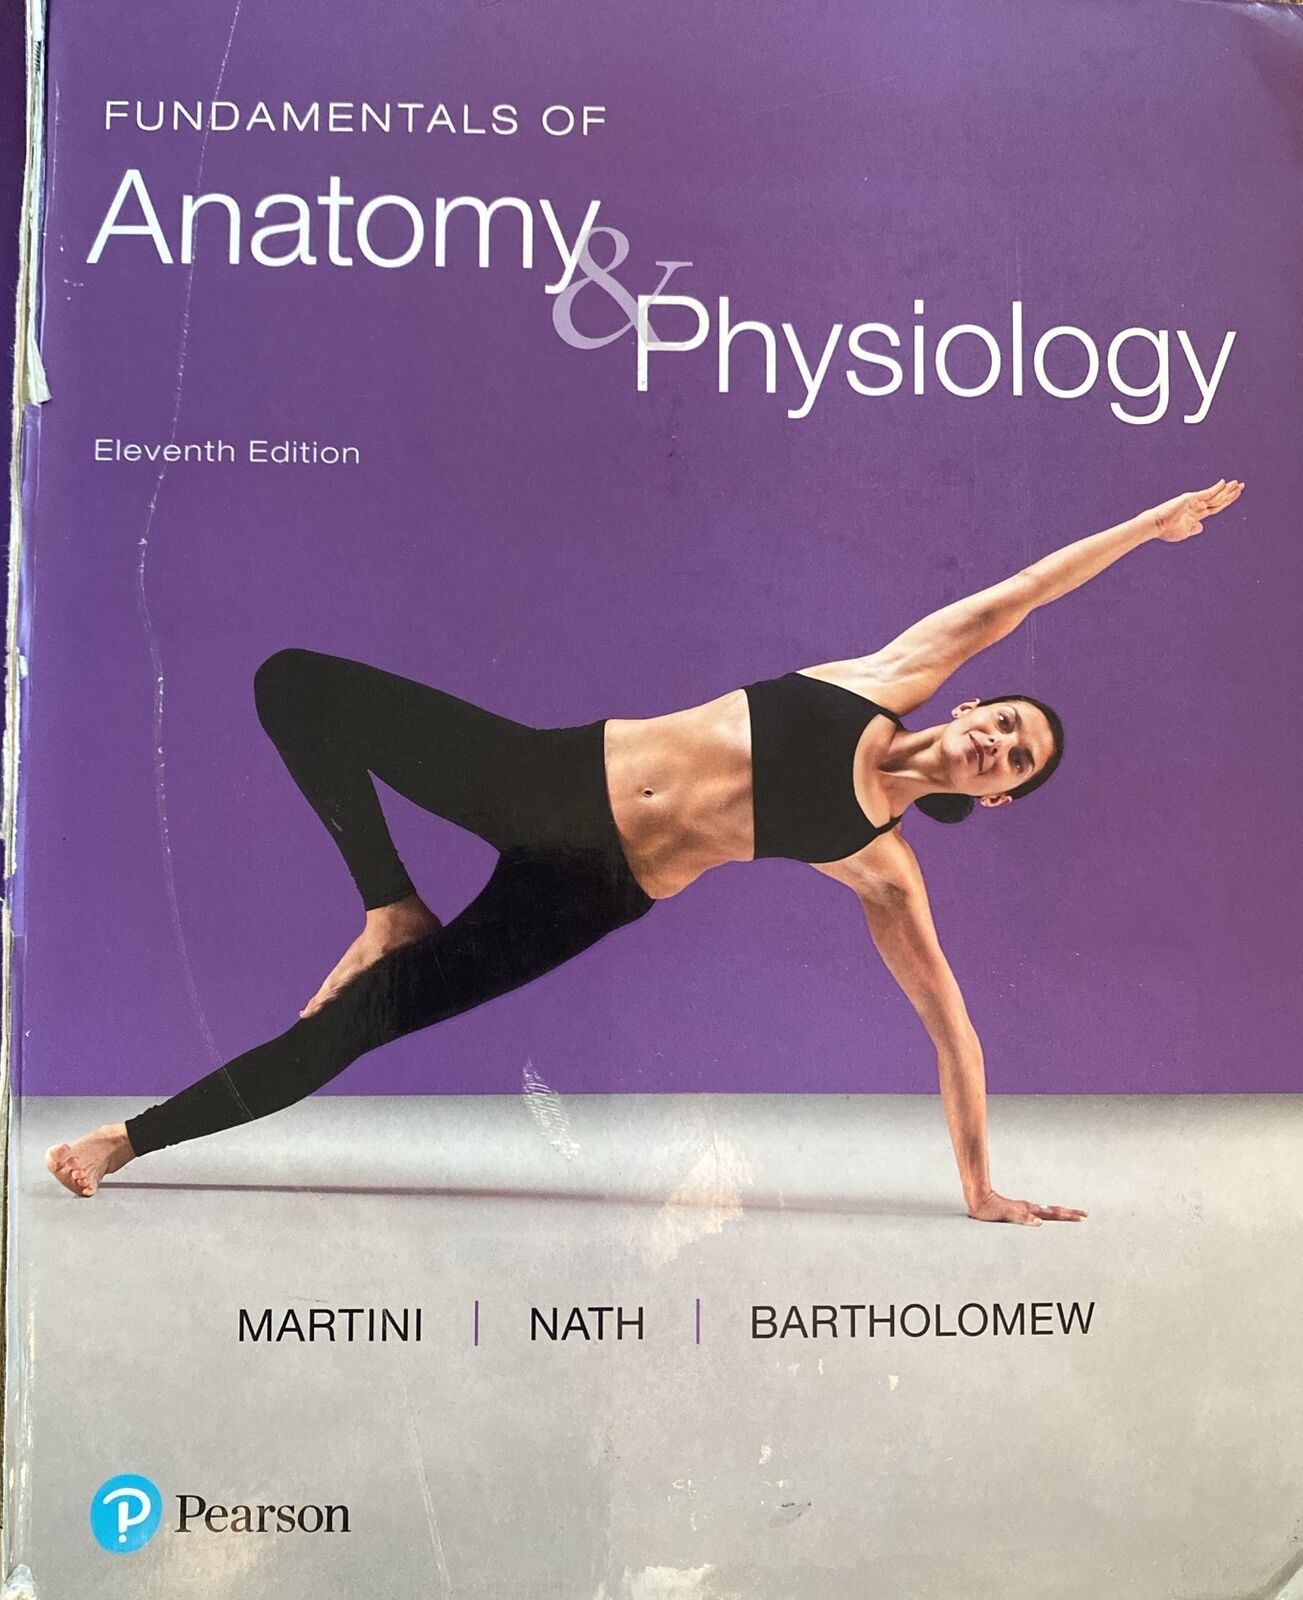 Fundamentals of Anatomy & Physiology (11th Edition; Hardcover)